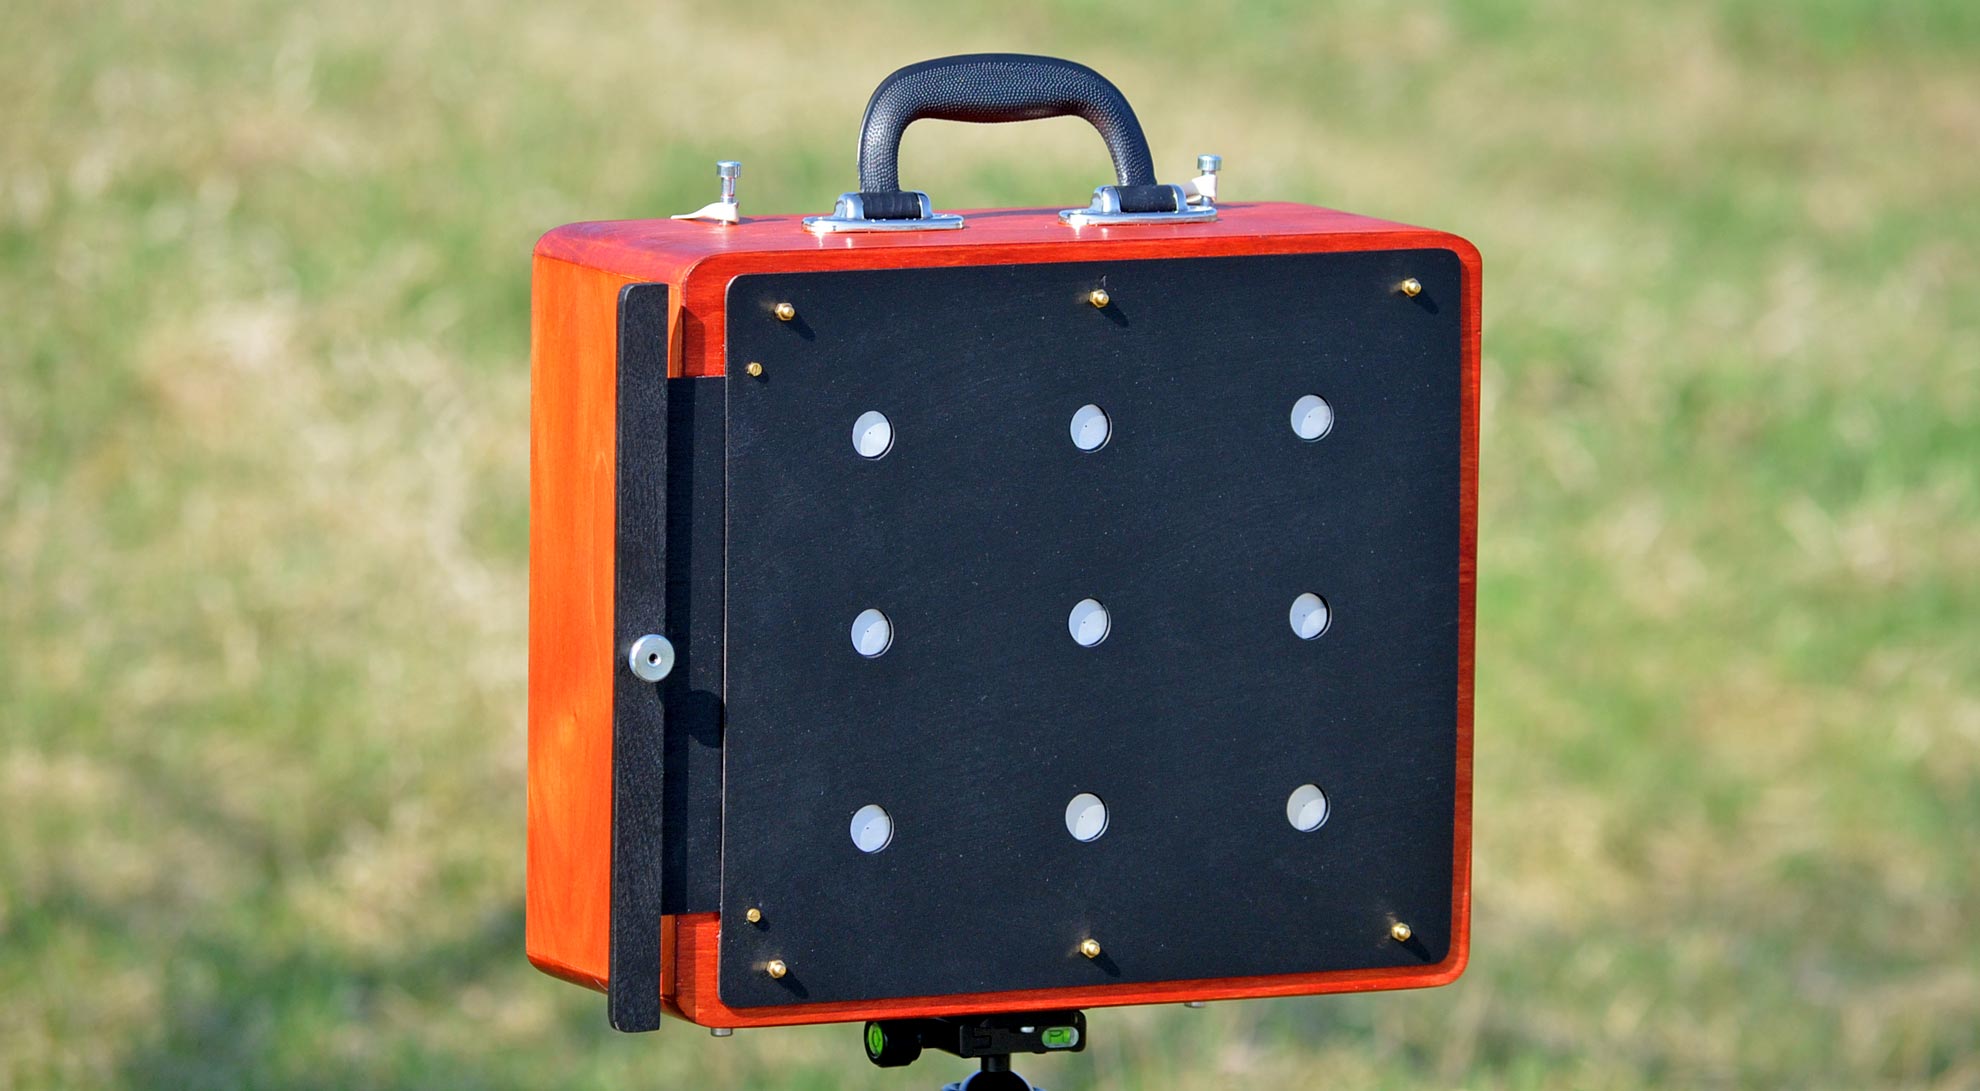 8x10 inch pinhole camera with 9 shutters opened simultaneously